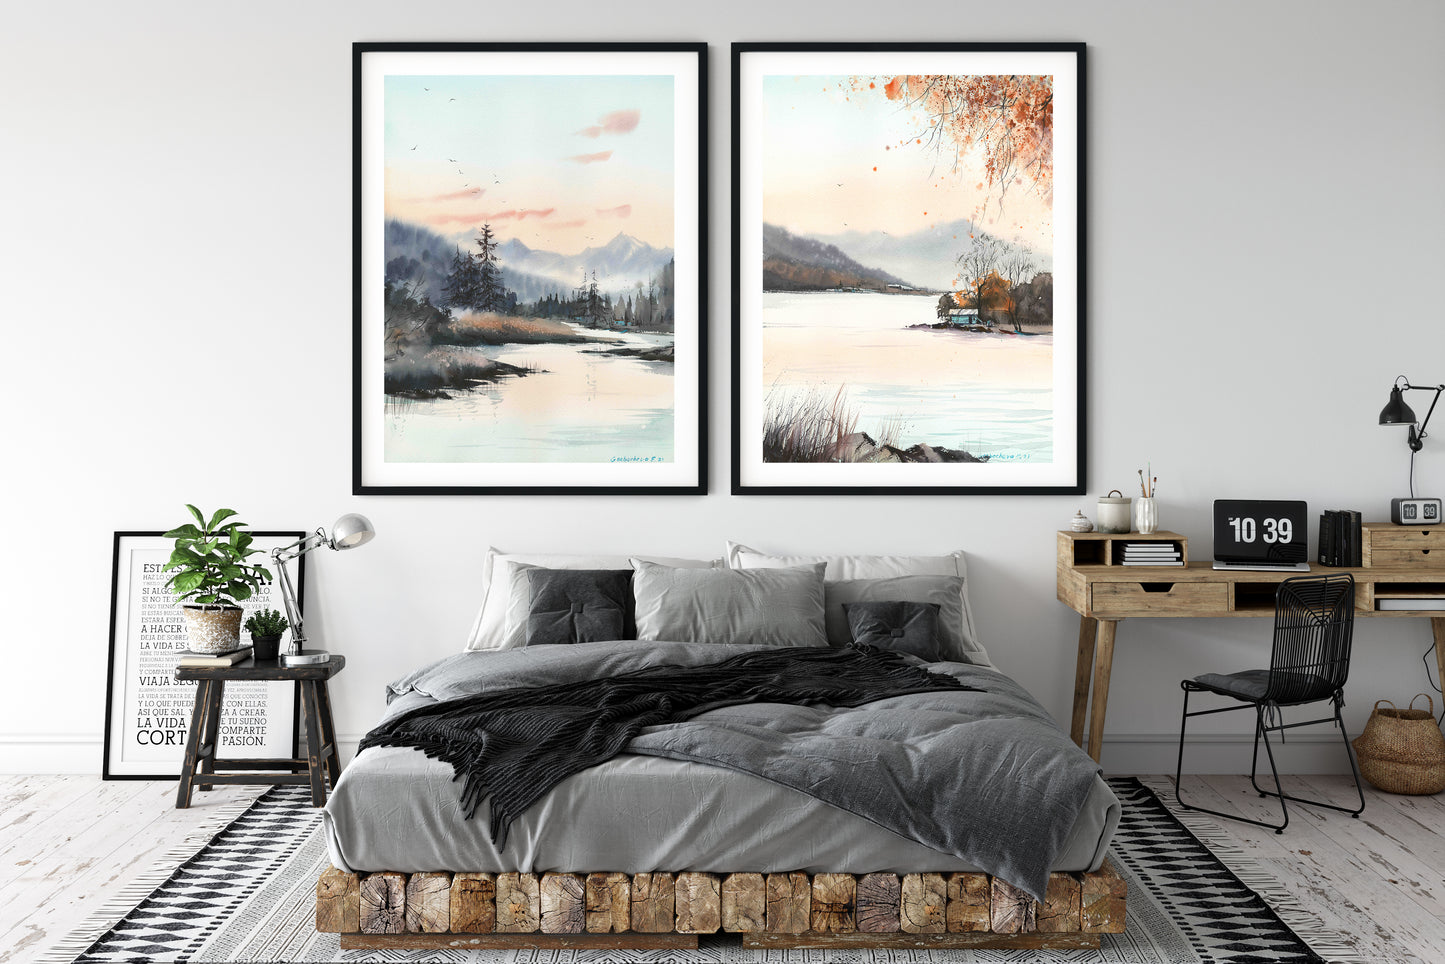 Set of 2 Watercolor Paintings, Nature Art Giclee Prints, Pine Tree Forest Wall Decor, Contemporary Bedroom Wall Art